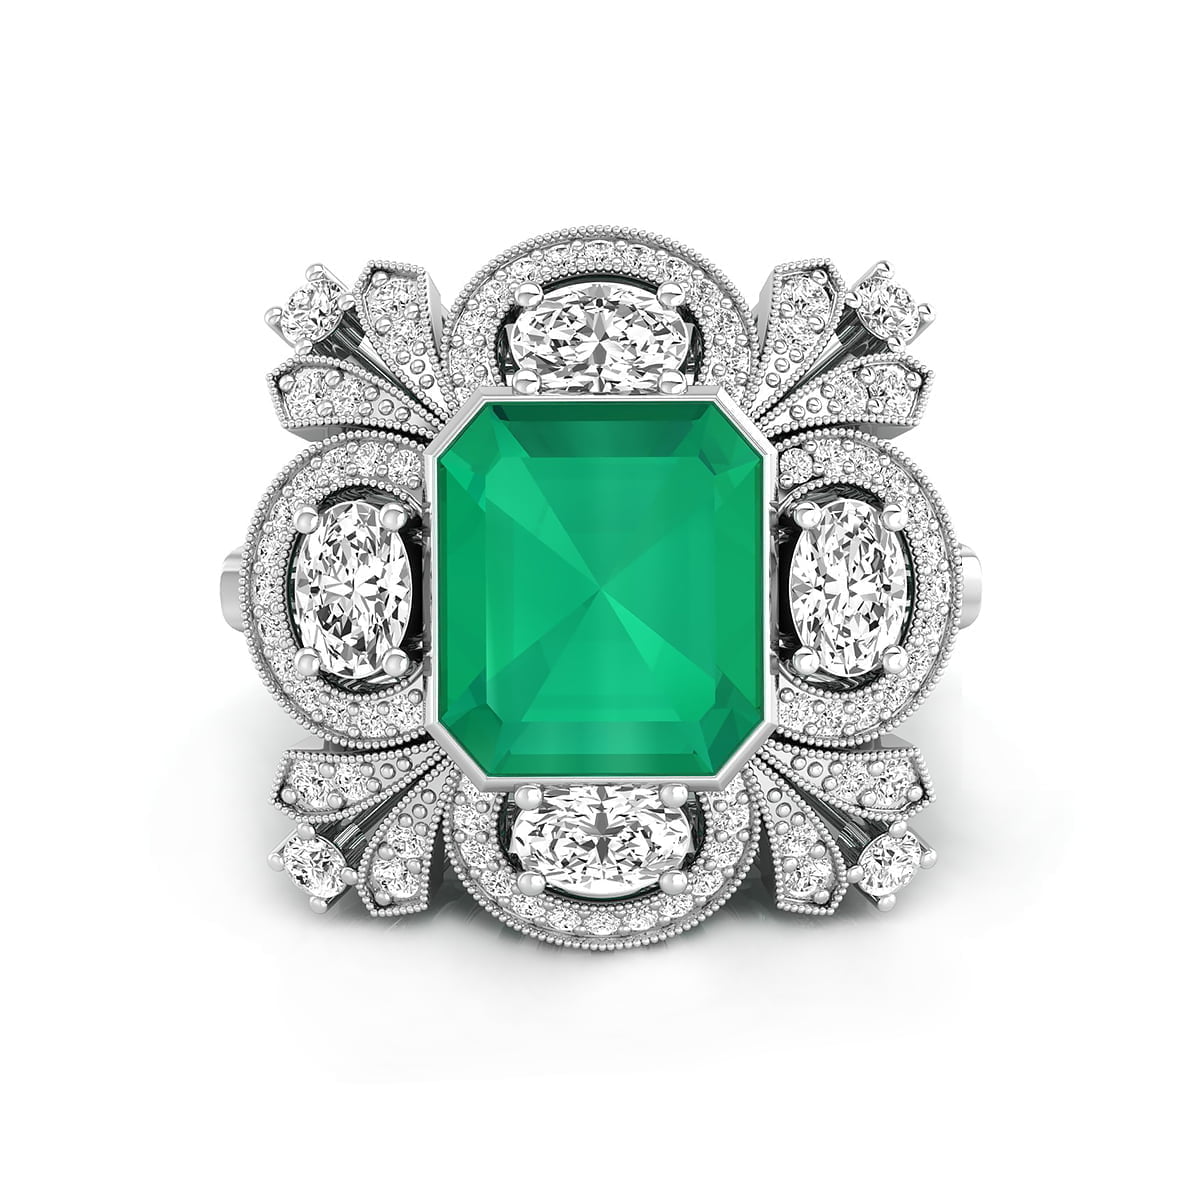 15x13 MM Green Emerald Or Oval & Round Cut CZ Stone Bezel Set Cocktail Party Wear Ring For Women